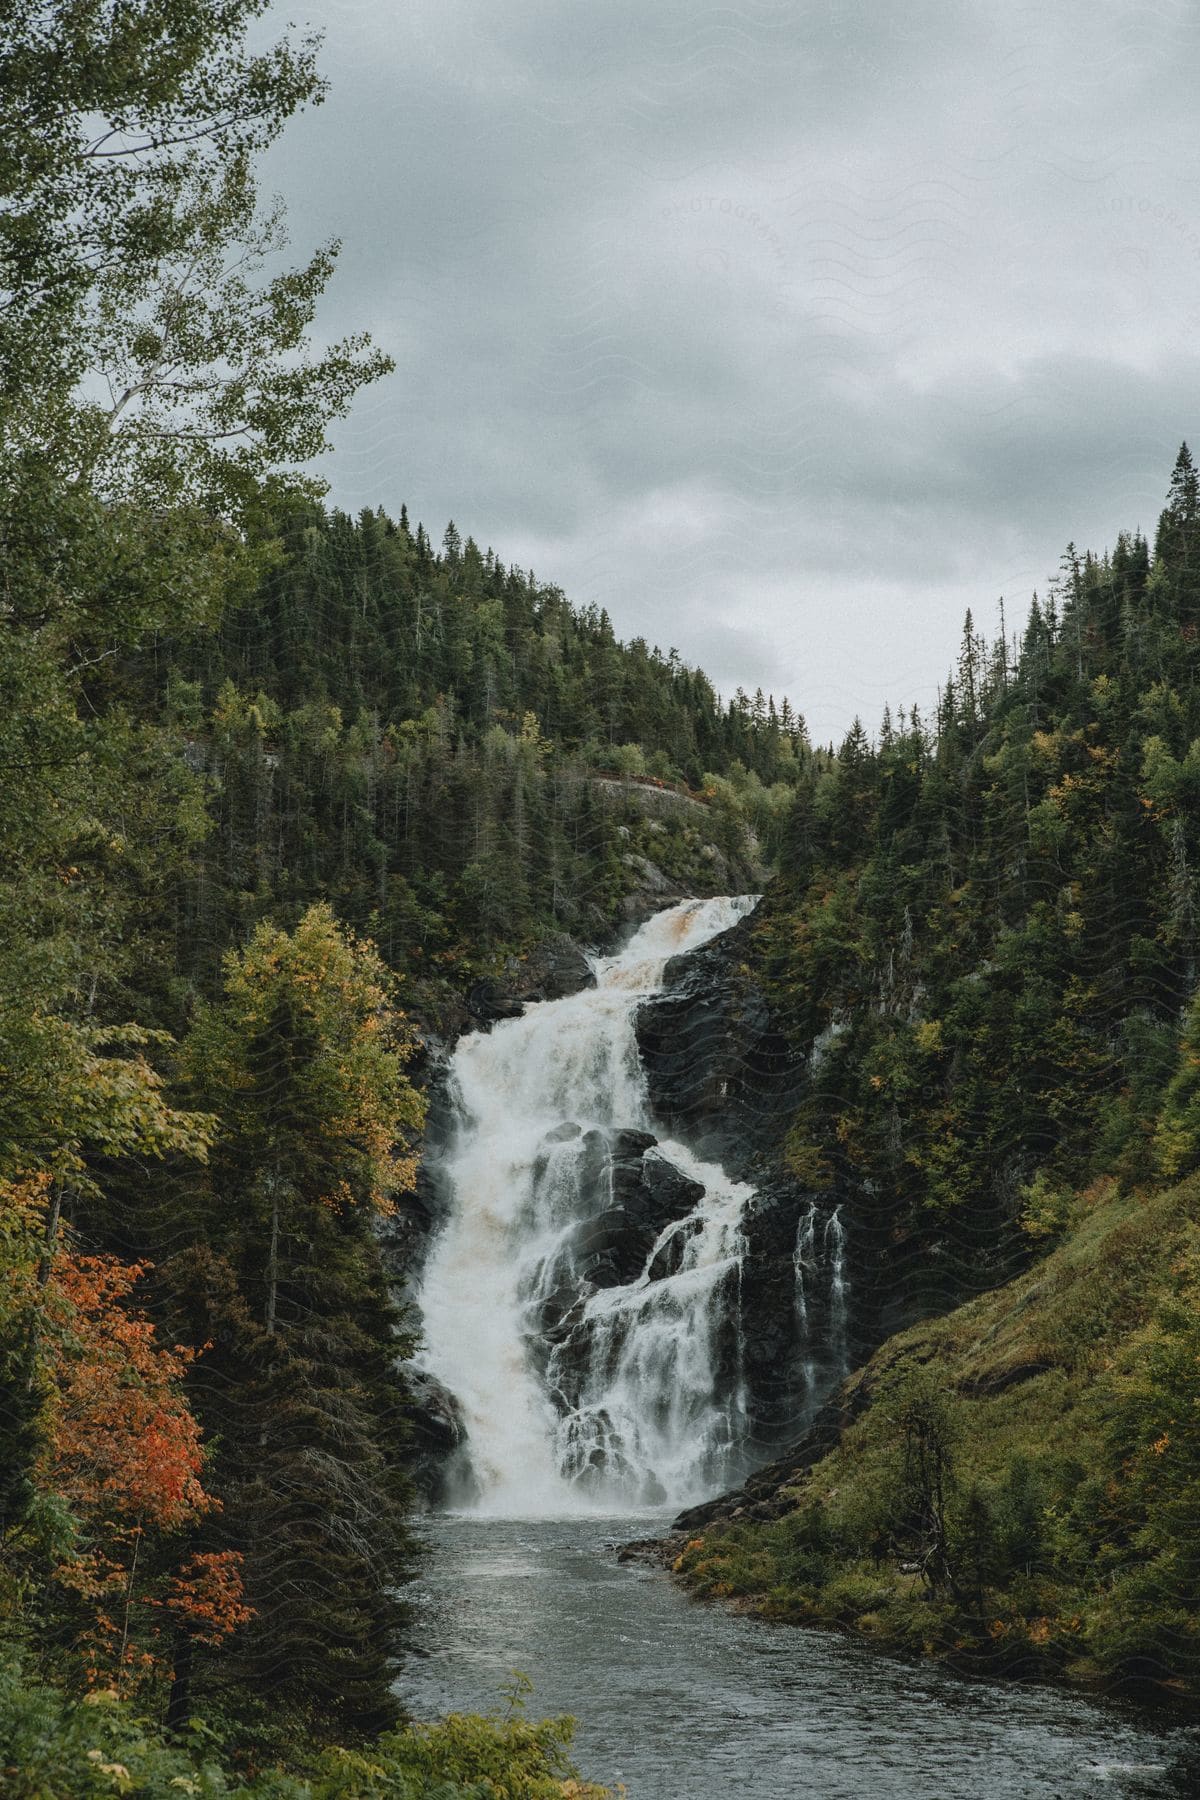 Landscape of a waterfall in the middle of a forest